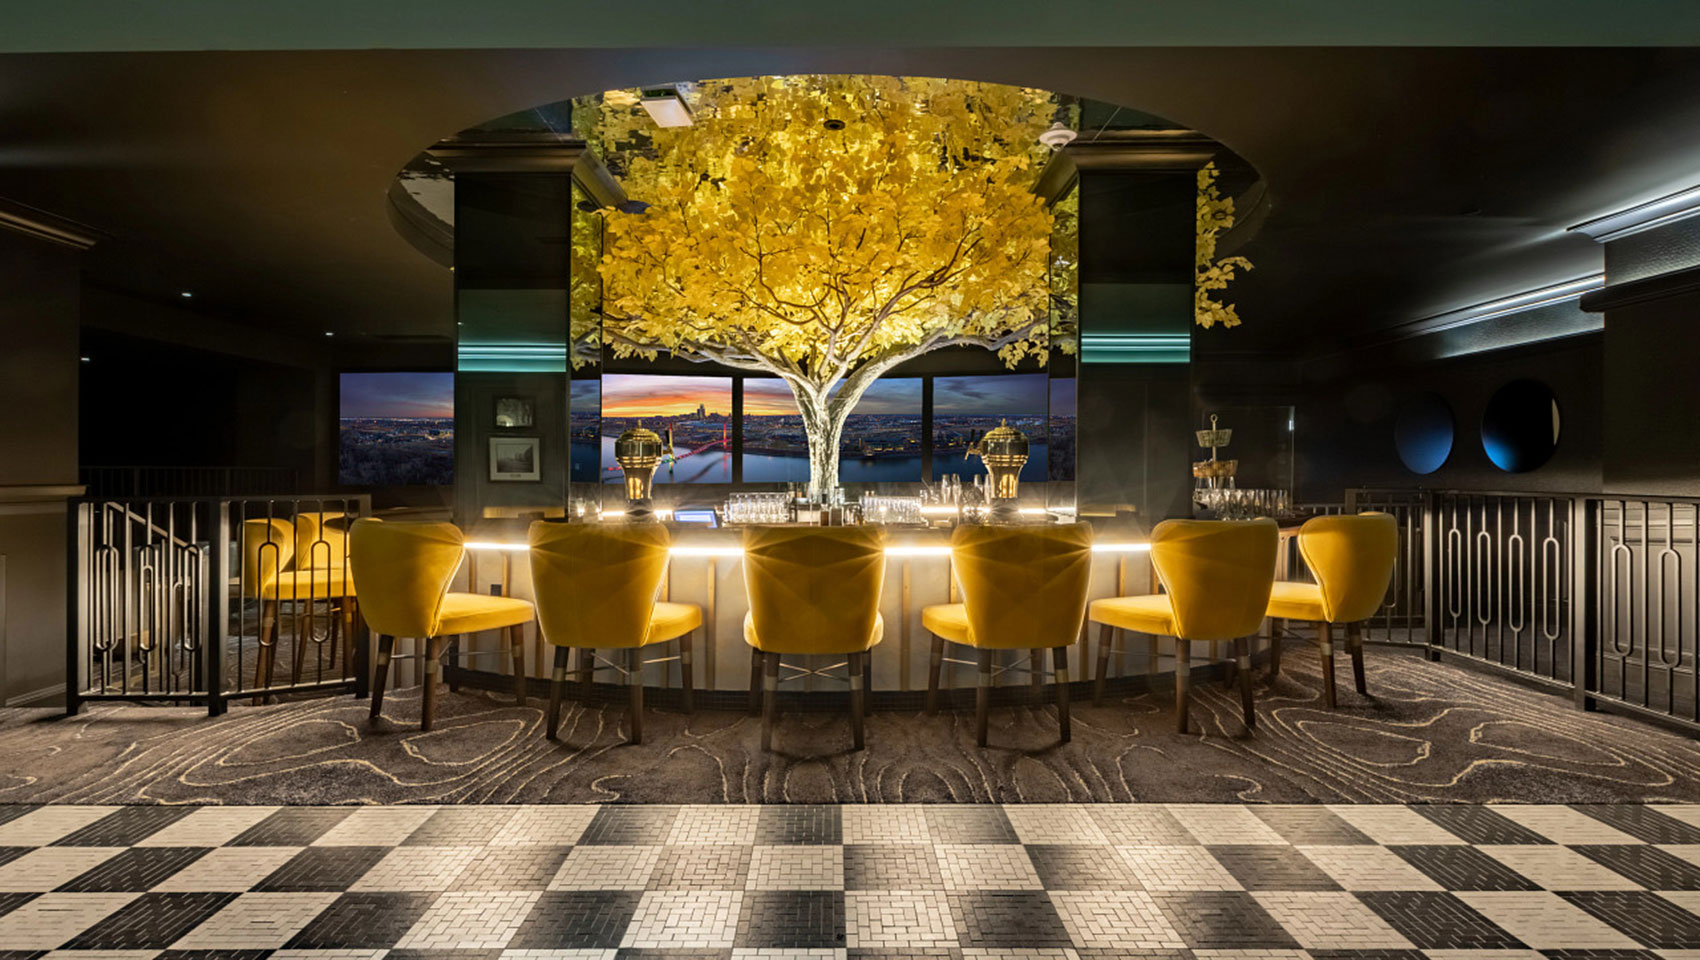 Committee Bar with lighted tree in center of bar which is surrounded by yellow bar chairs and an underlit bar